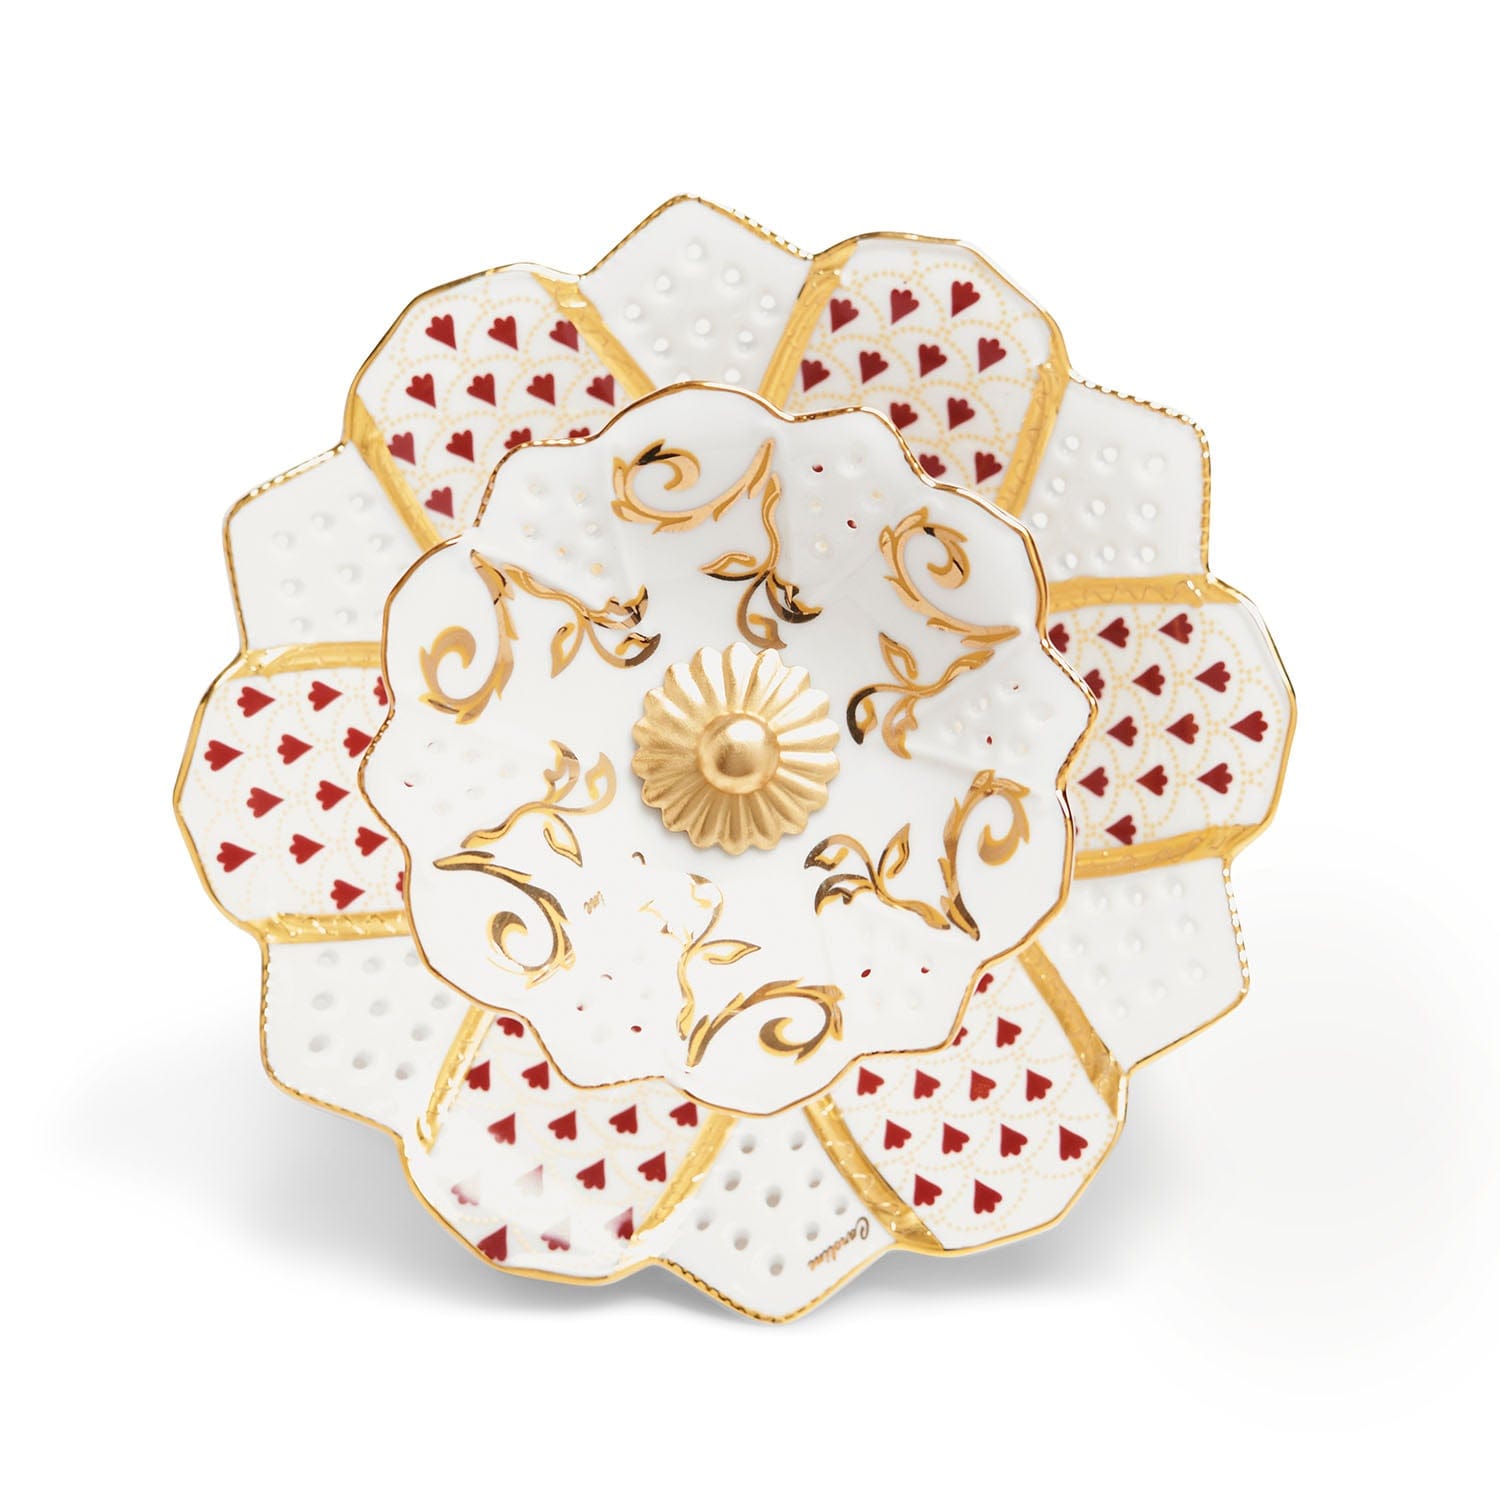 Royal Red 2 Tier Round Bowls Cream And Gold - A3521645